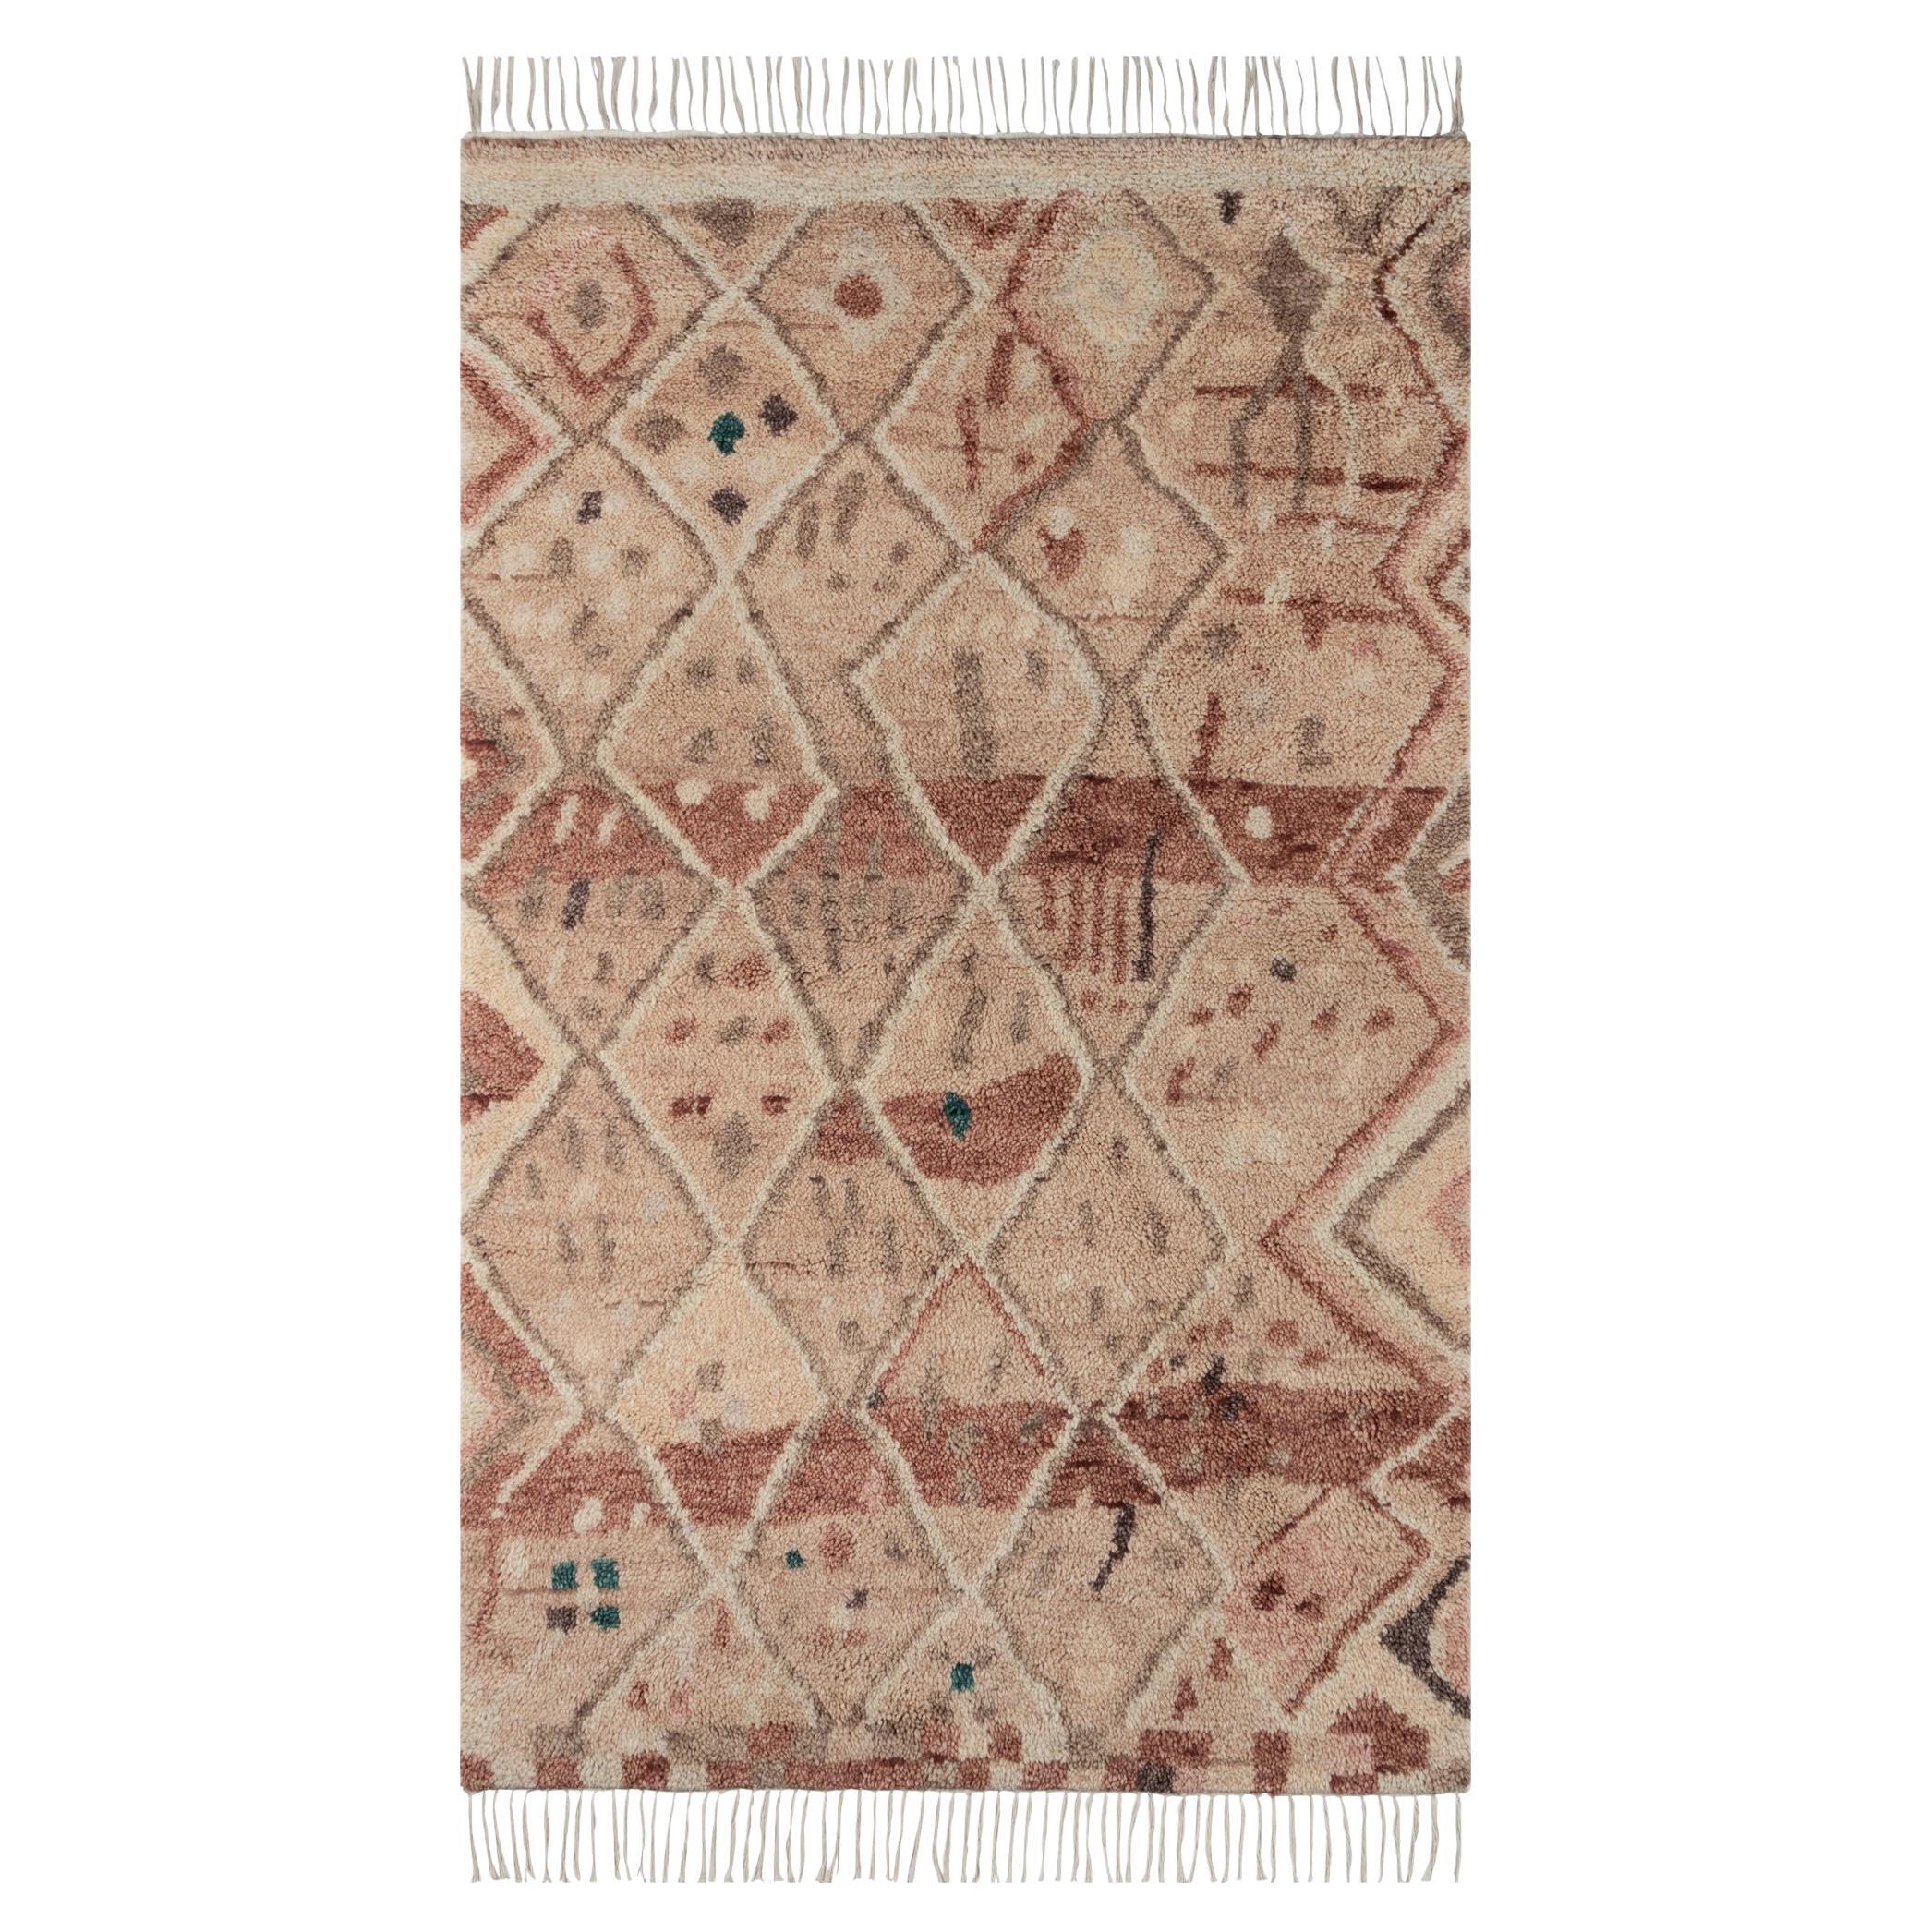 “Doukkala Gnibi” 'Natural' Moroccan-Inspired Rug by Christiane Lemieux For Sale